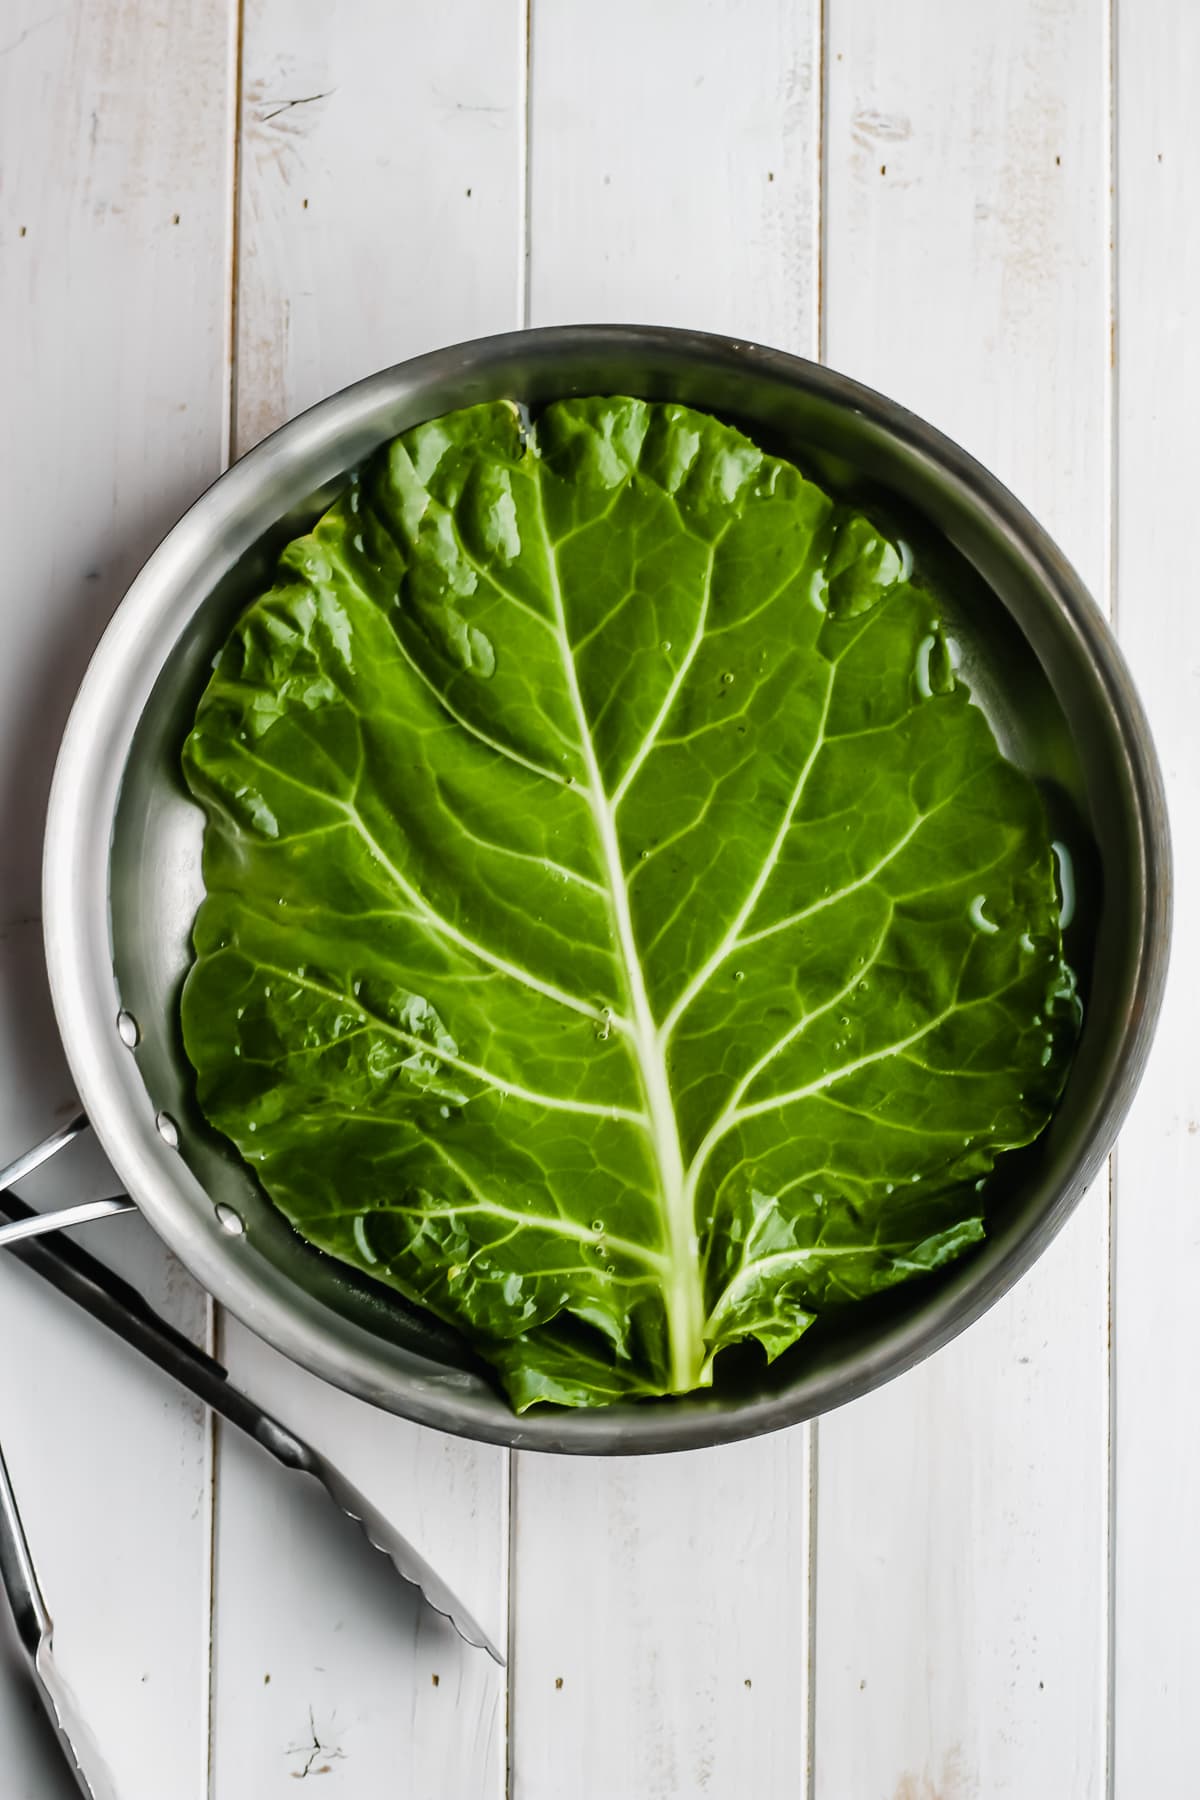 Collard leaf being blanched in boiling water.